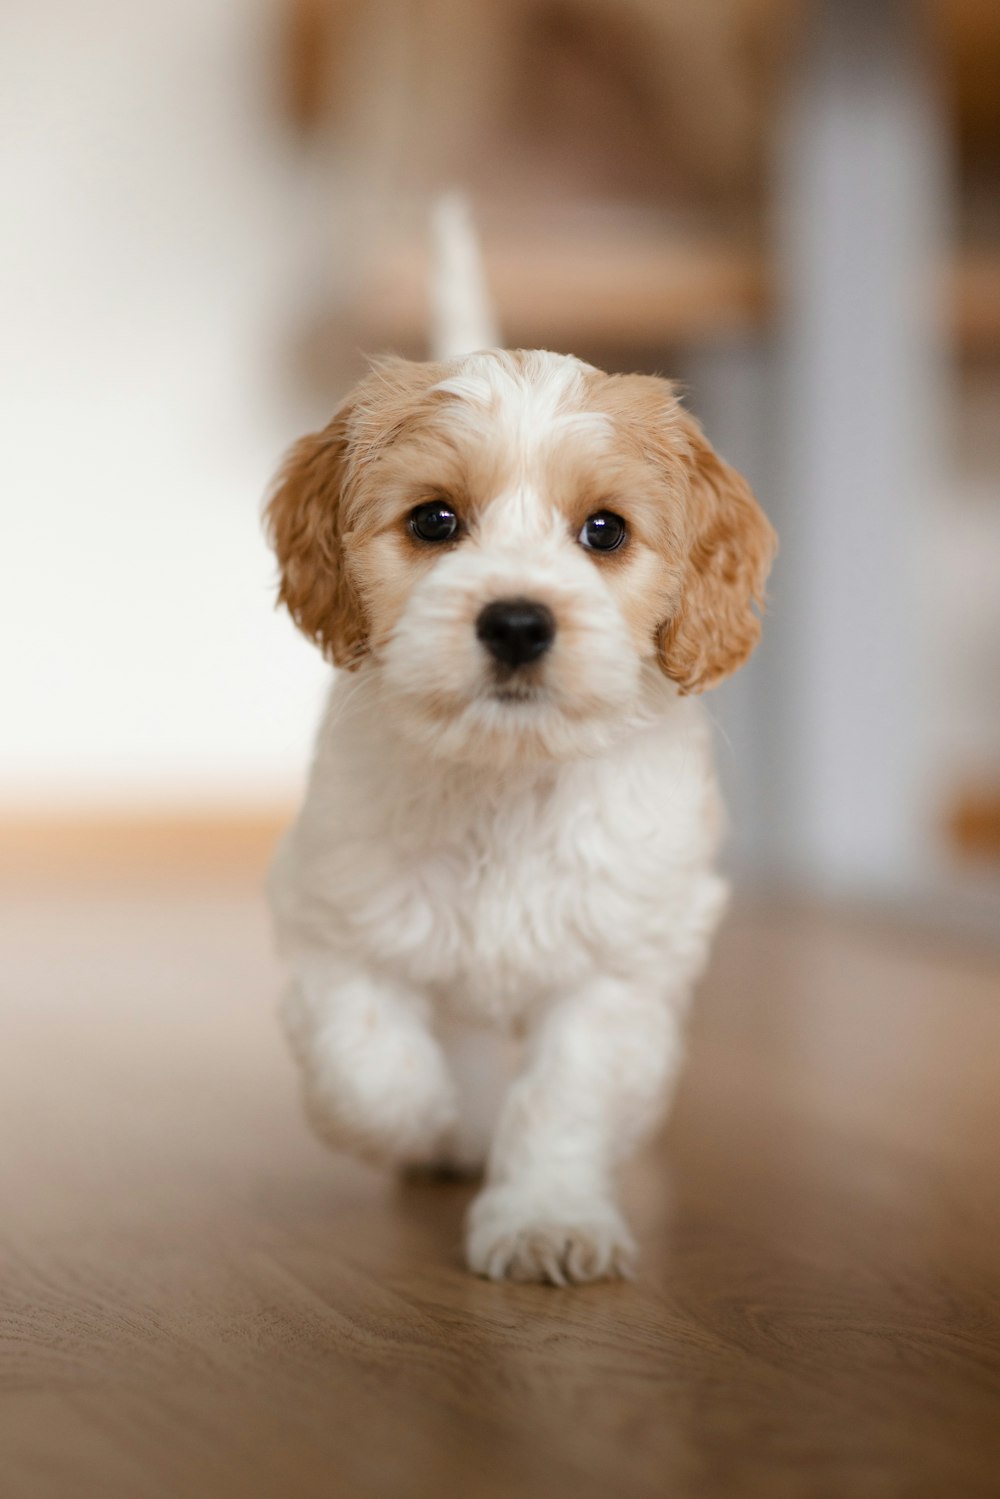 a small white and brown dog sitting on top of a wooden floor